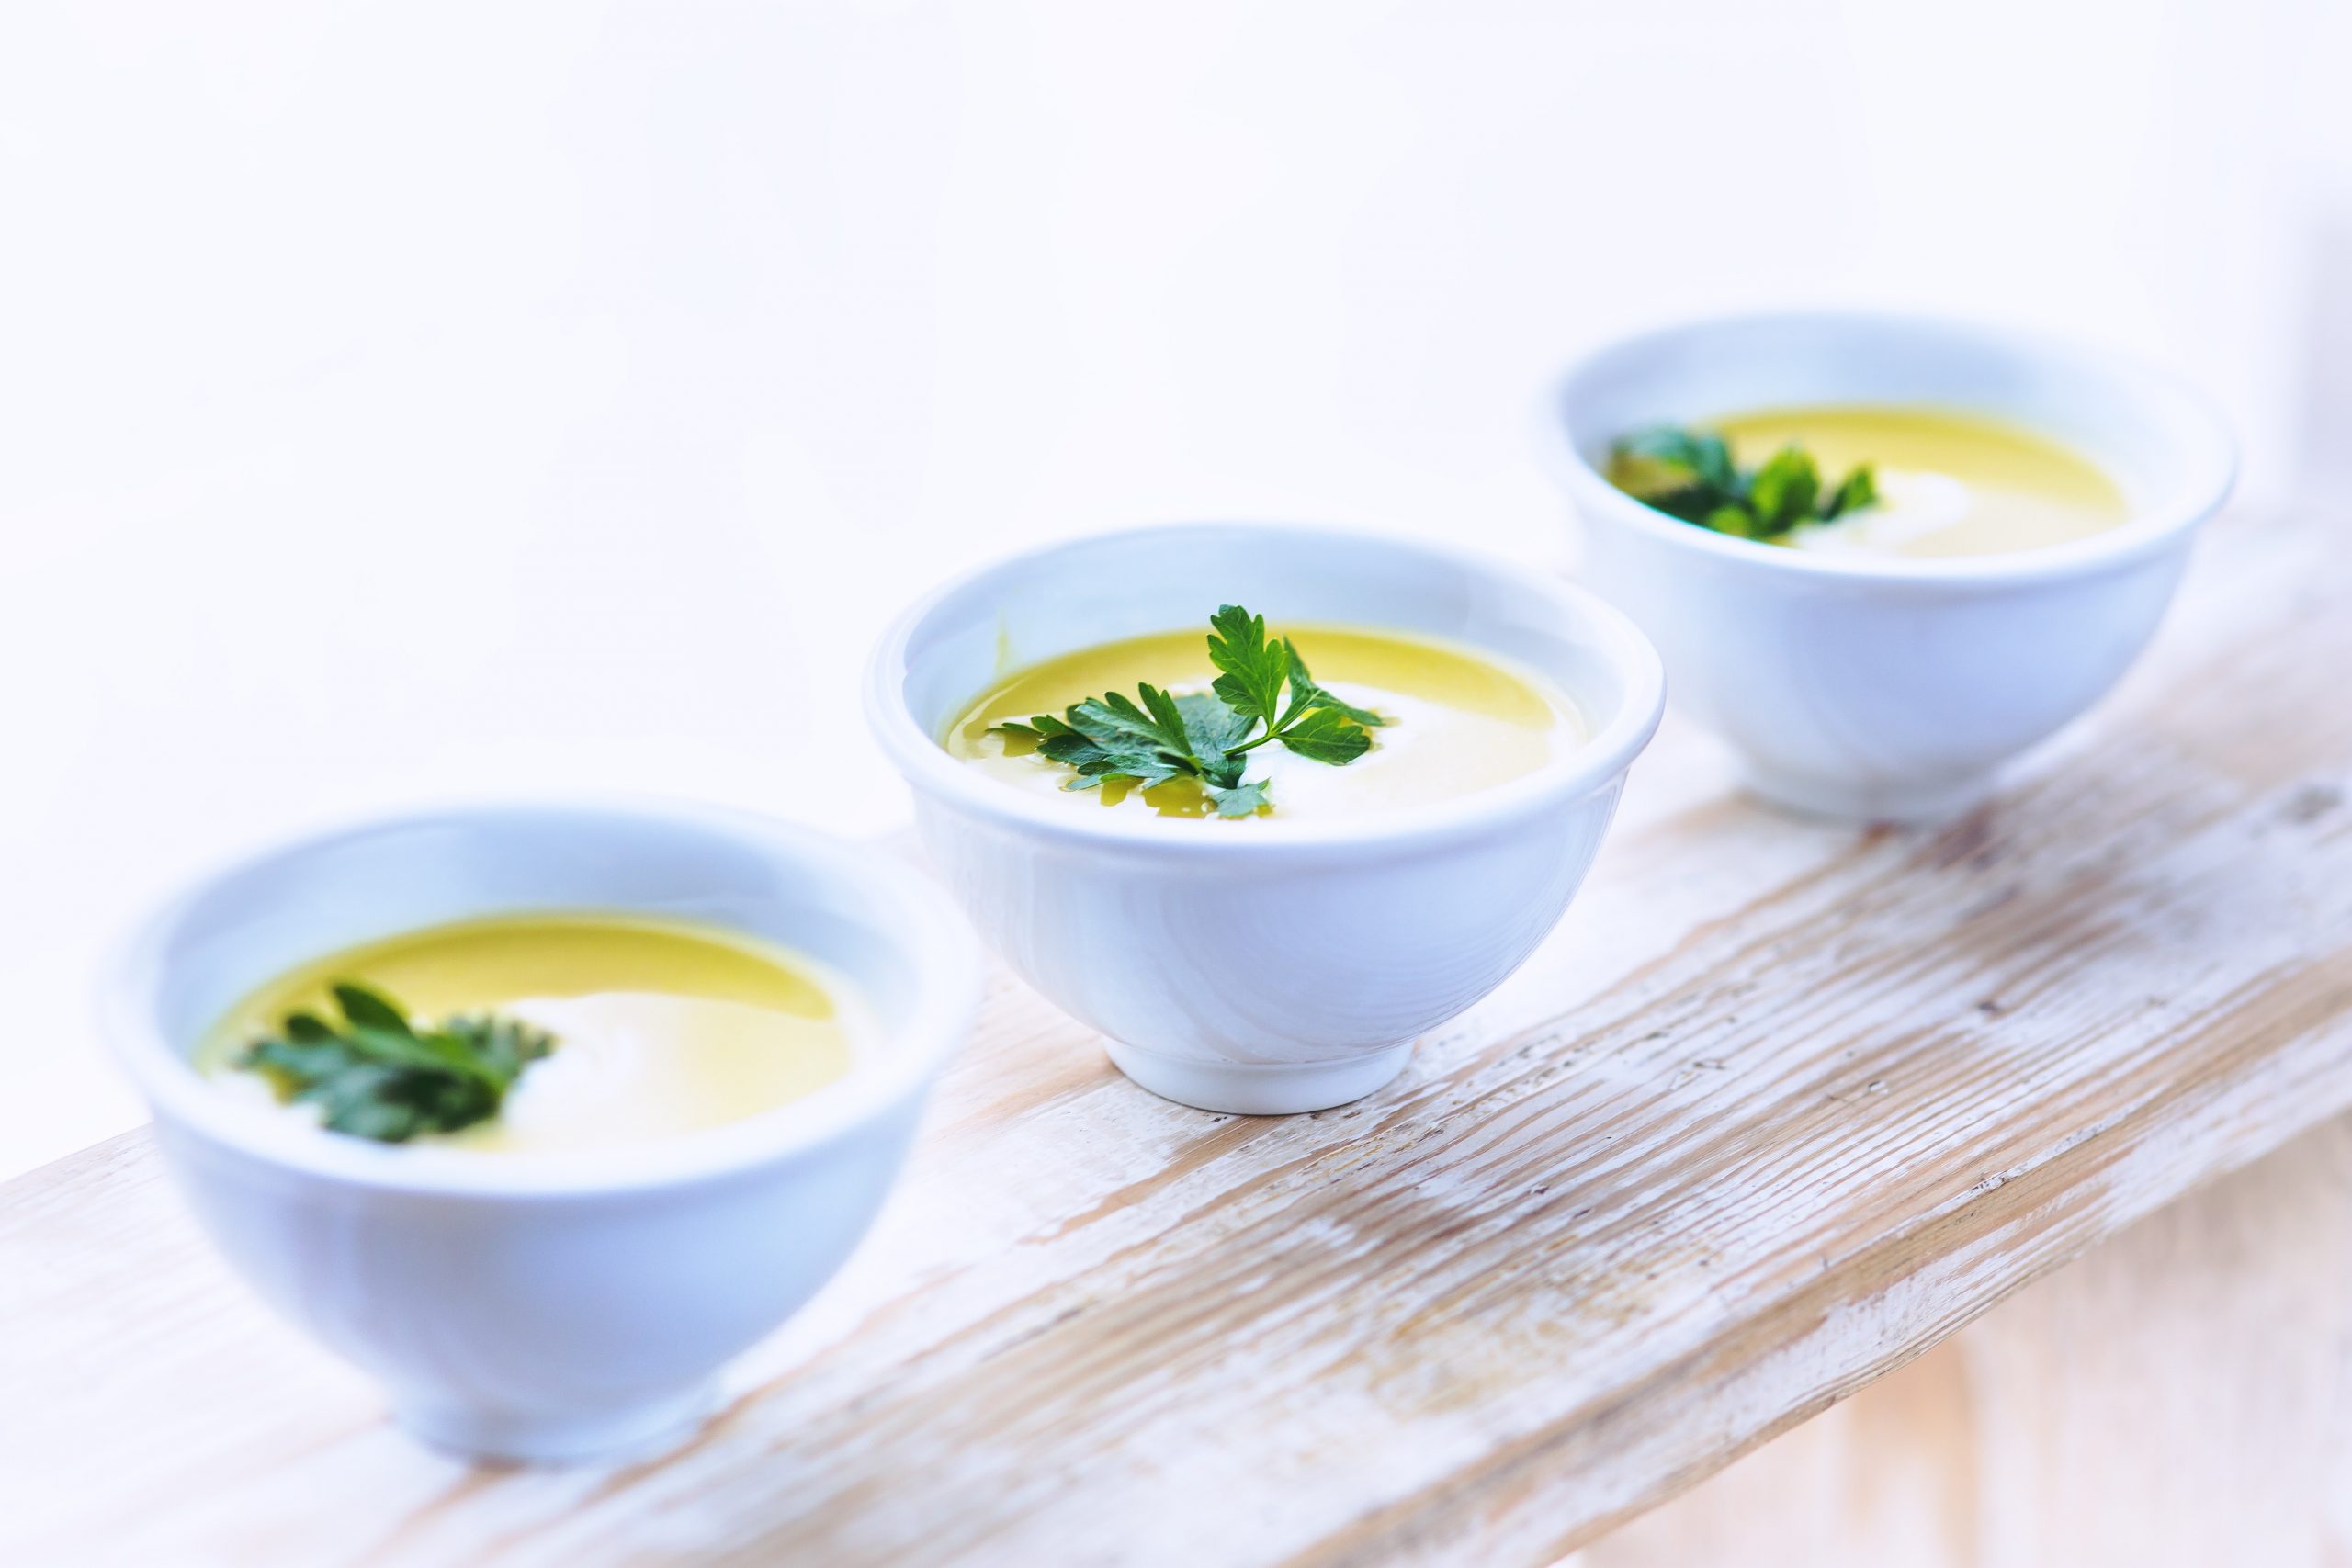 Easy-to-digest soup; the importance of optimal digestion.